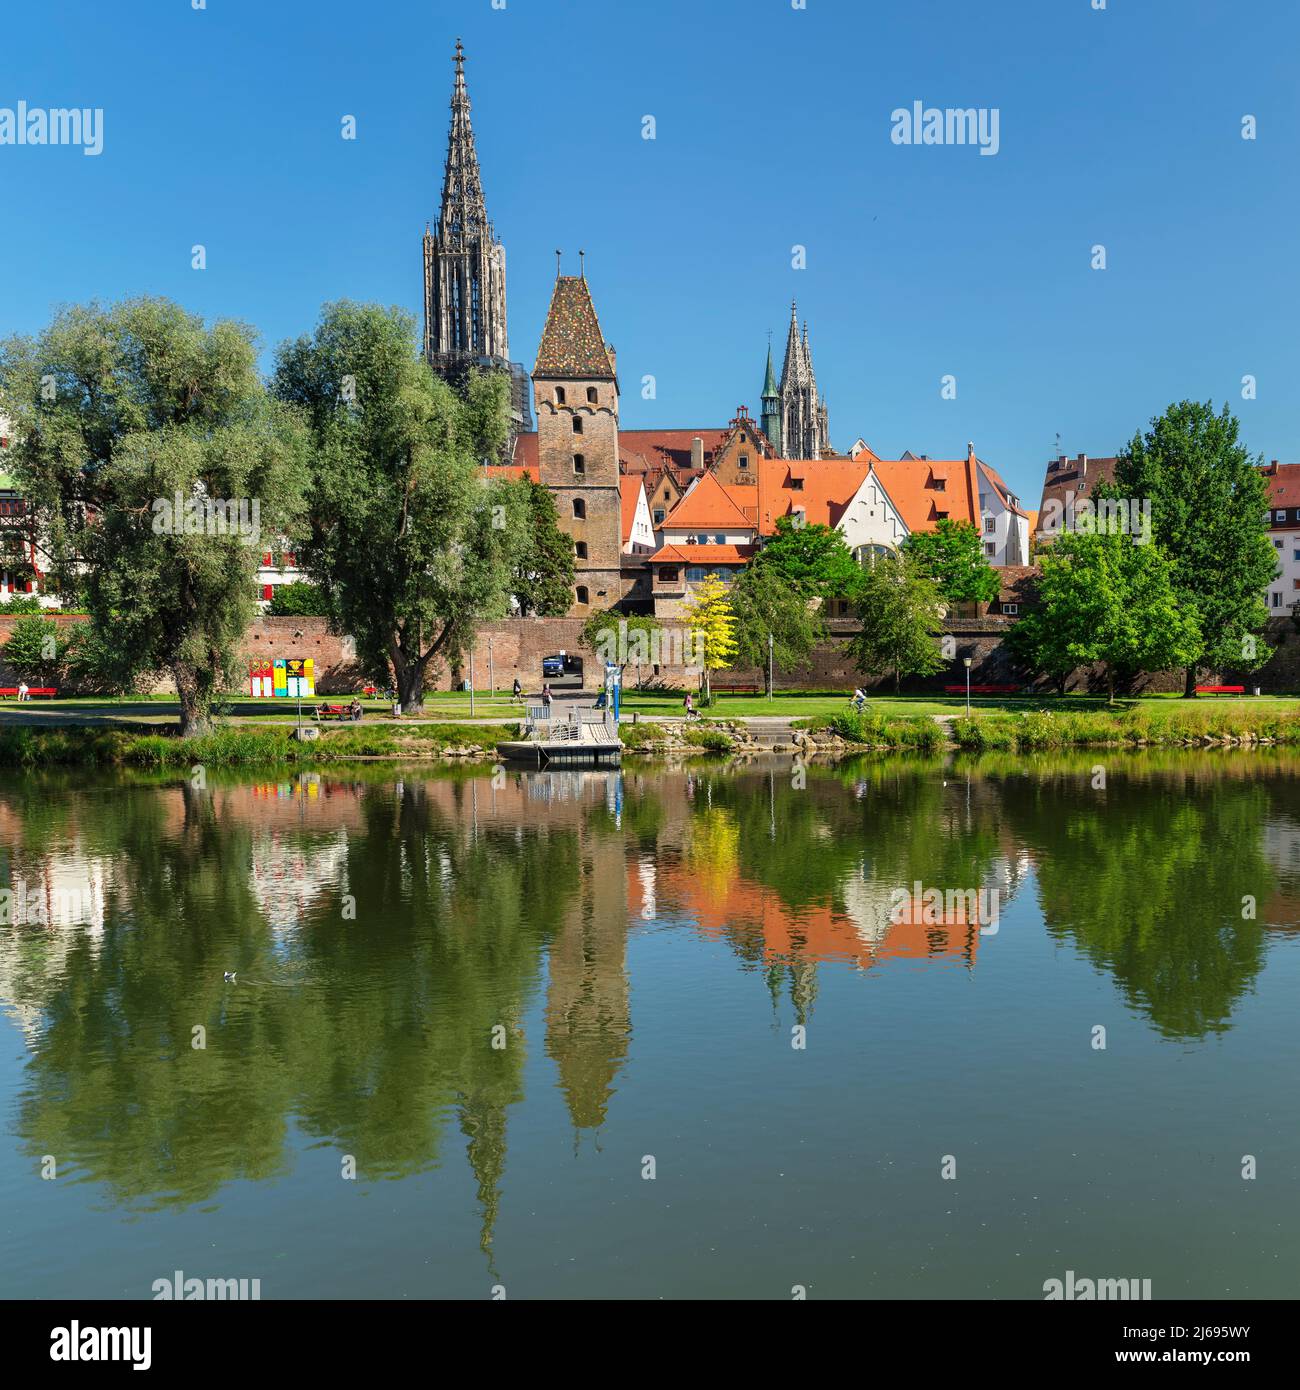 View over Danube River to Ulm Minster and the Old Town, Ulm, Baden-Wurttemberg, Germany Stock Photo